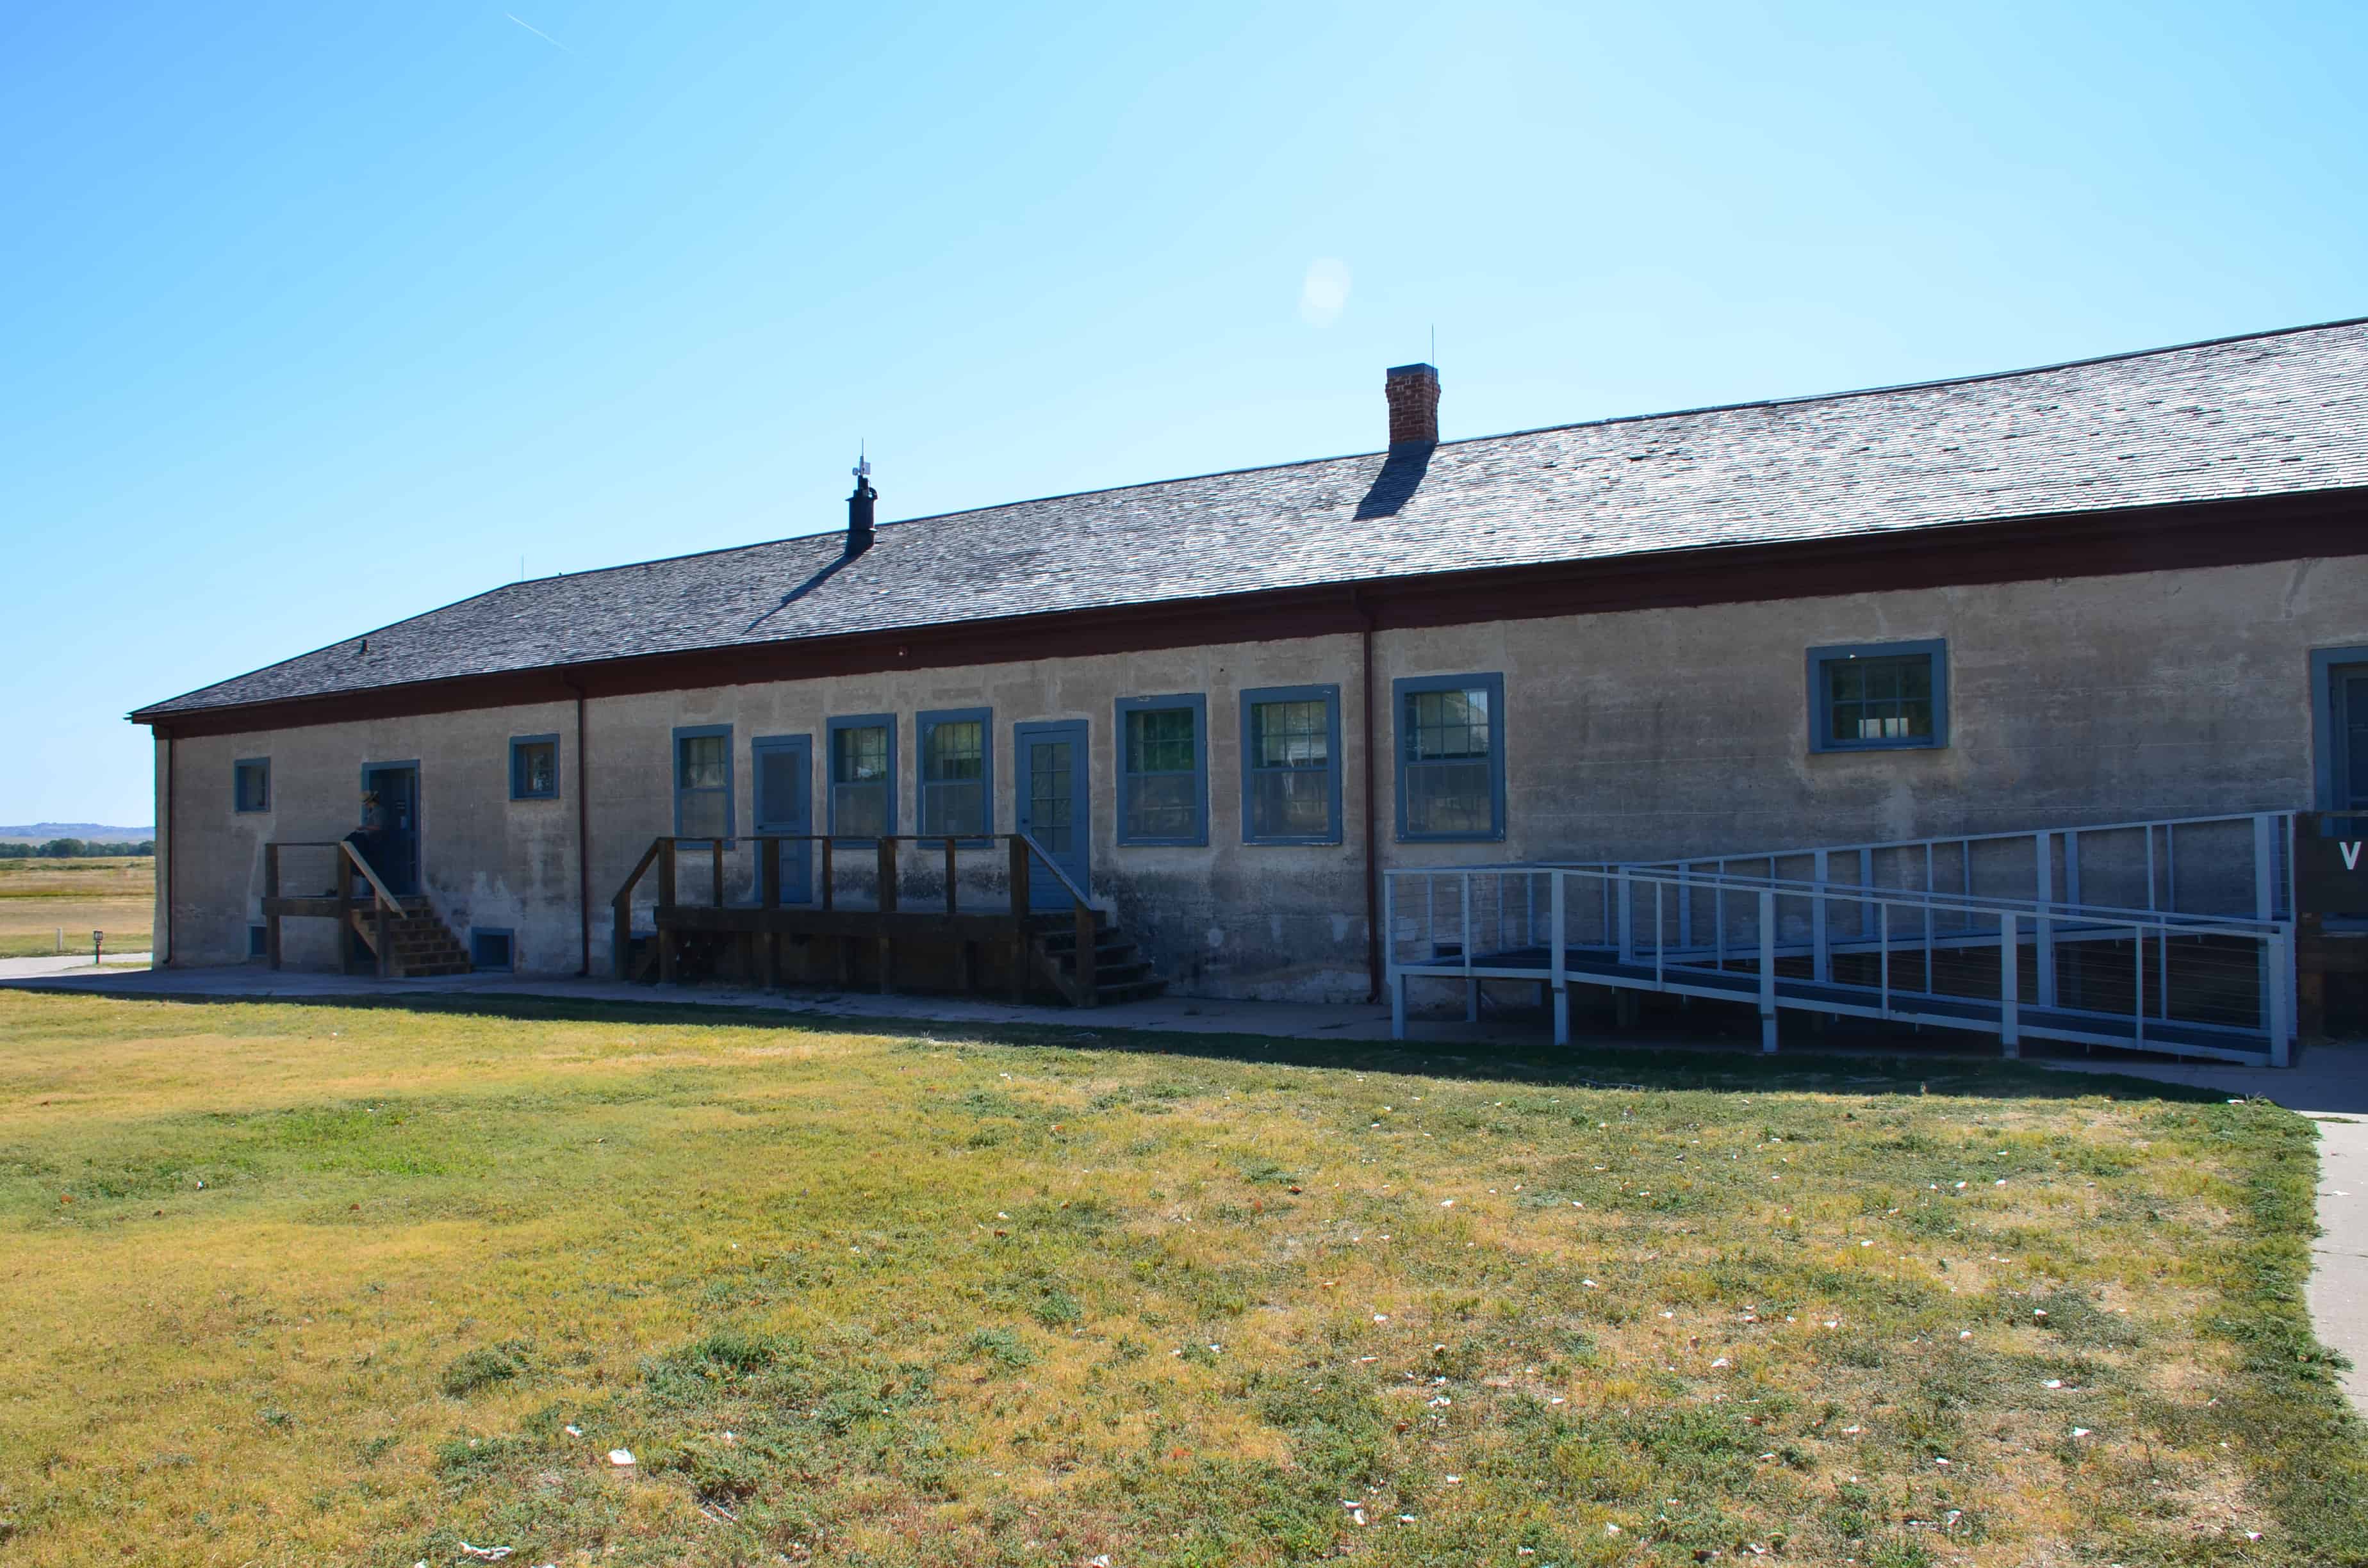 Commissary storage (Visitor Center) at Fort Laramie National Historic Site in Wyoming